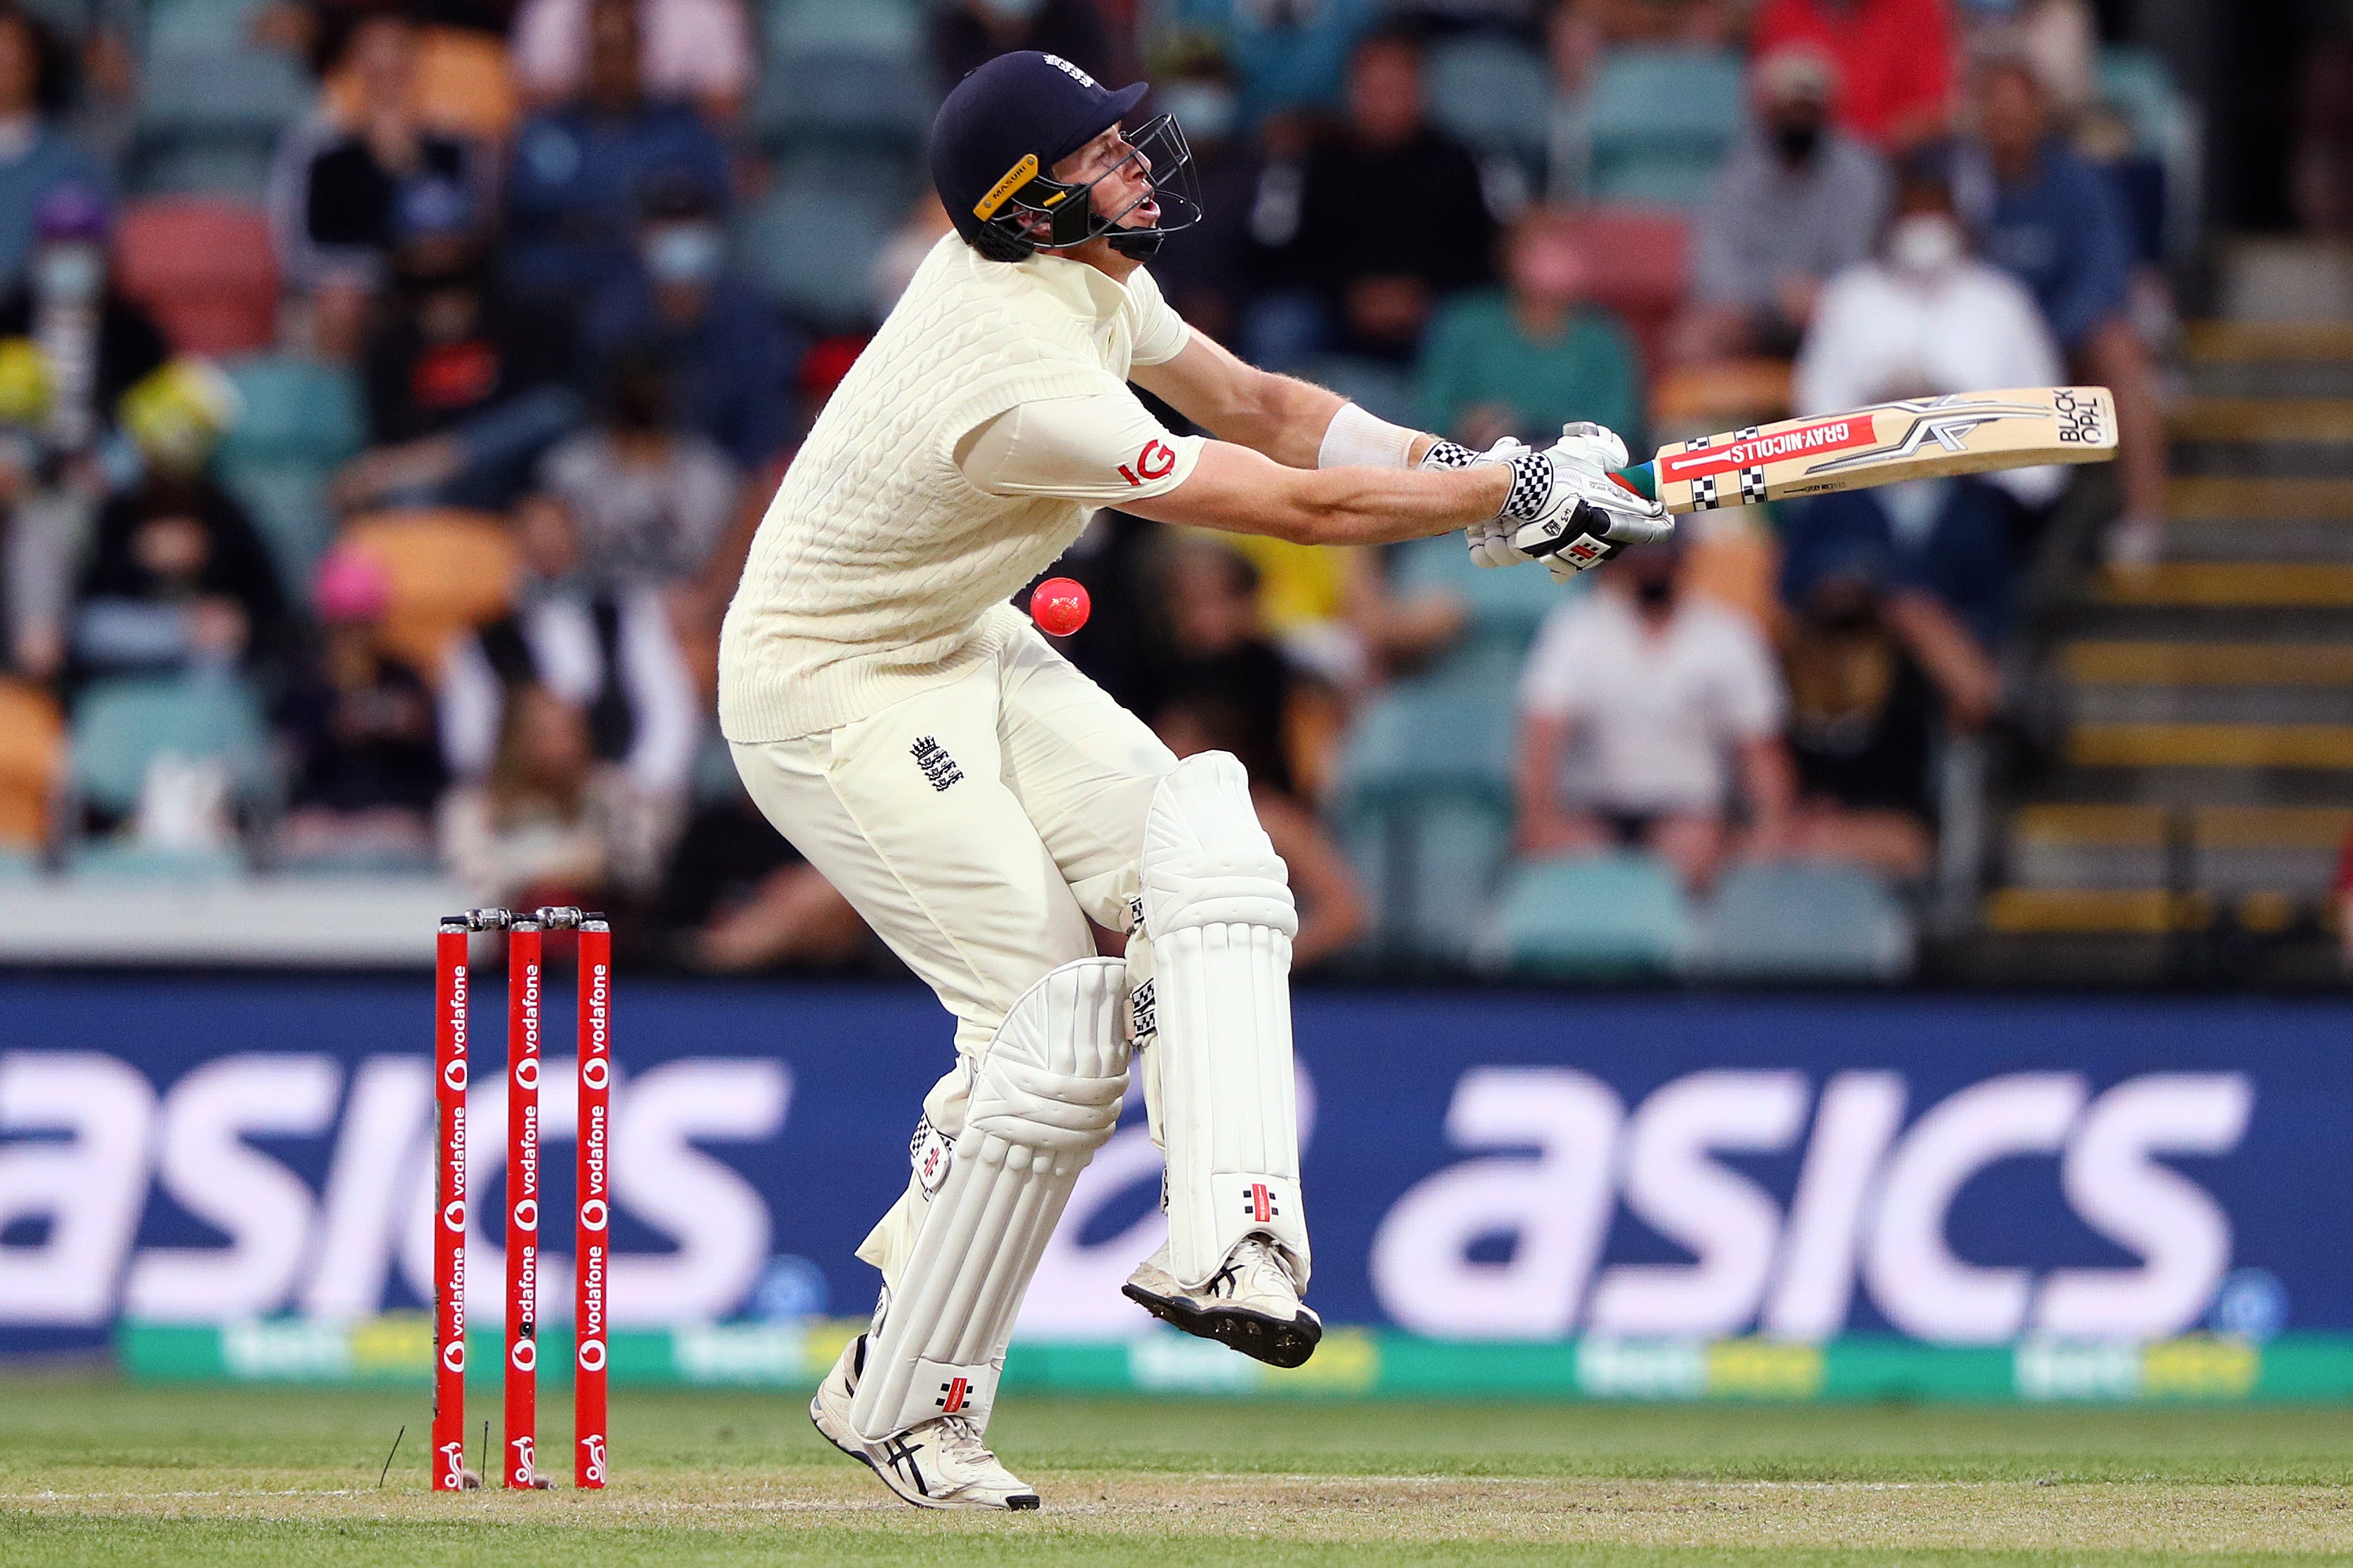 England batter Zak Crawley is struck by a delivery from Australia’s Pat Cummins during their fifth Test Ashes defeat in Hobart (Tertius Pickard/AP)